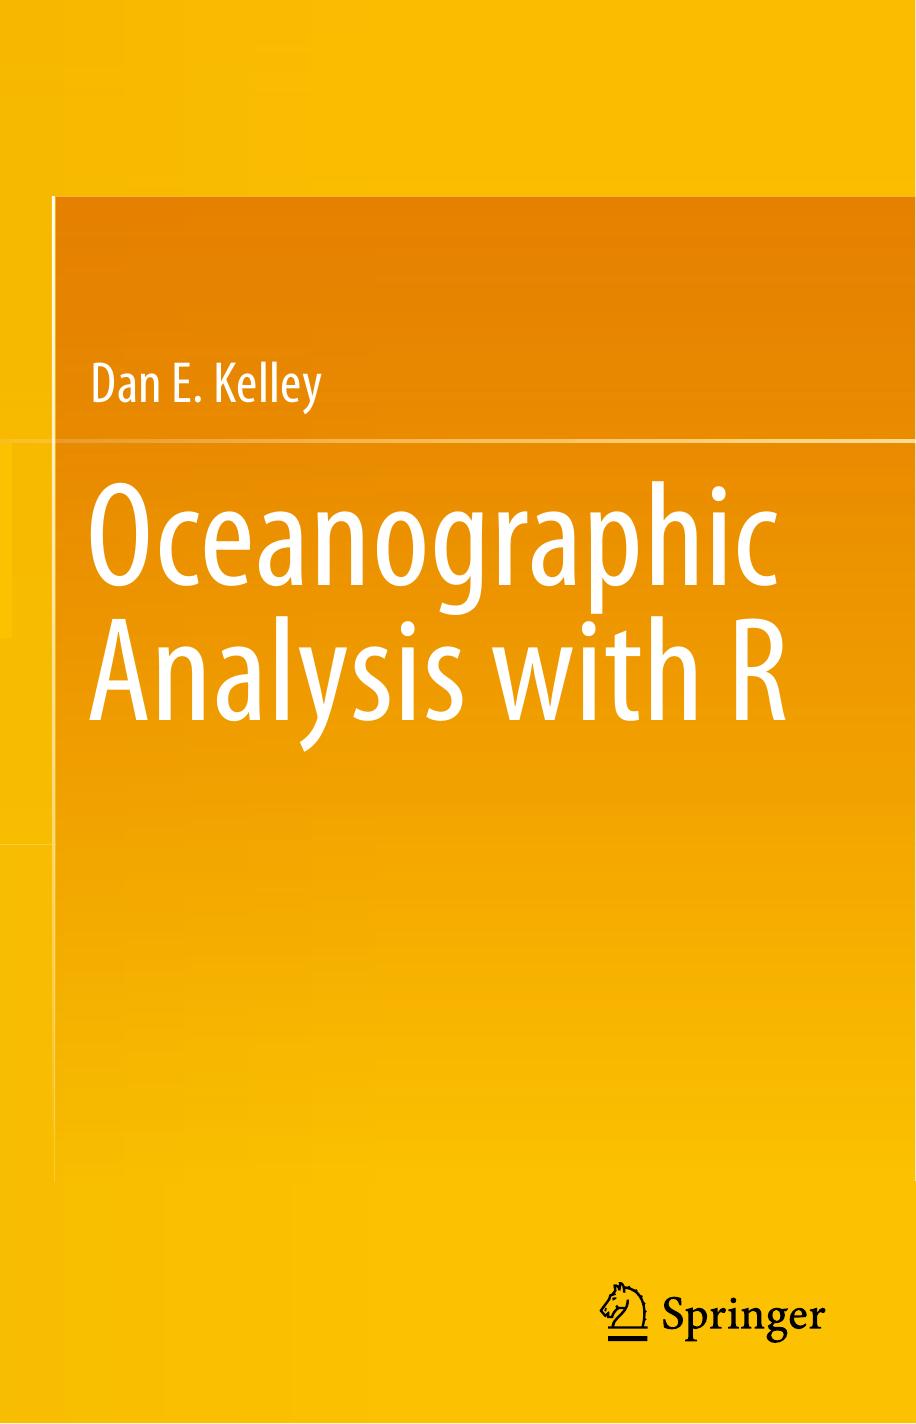 Oceanographic Analysis with R by Dan E. Kelley